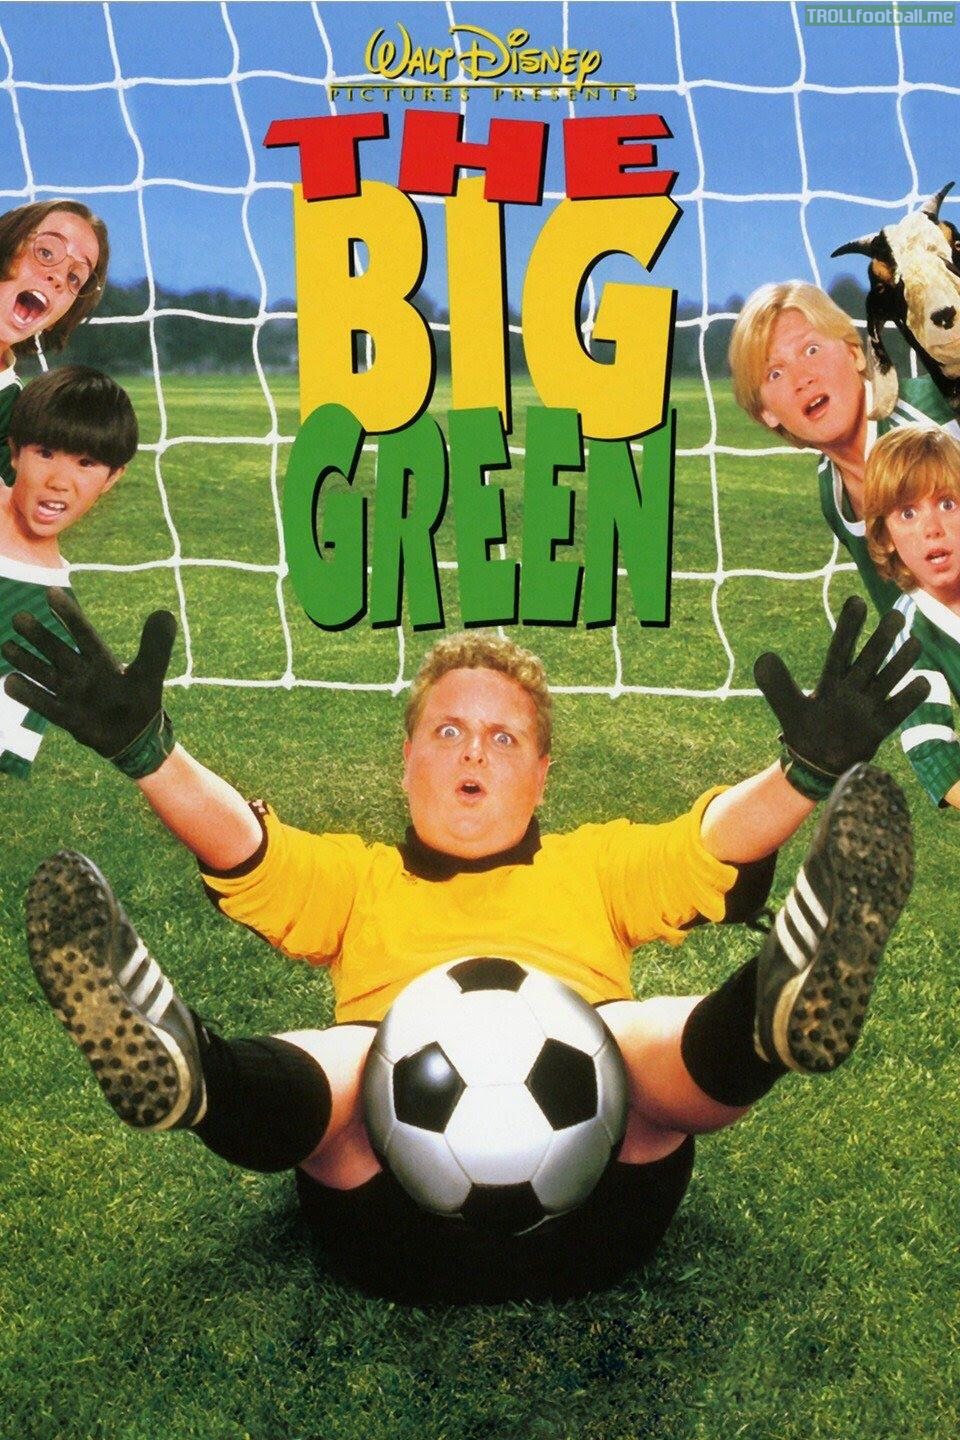 The Big Green (1995) a classic 90s soccer movie!